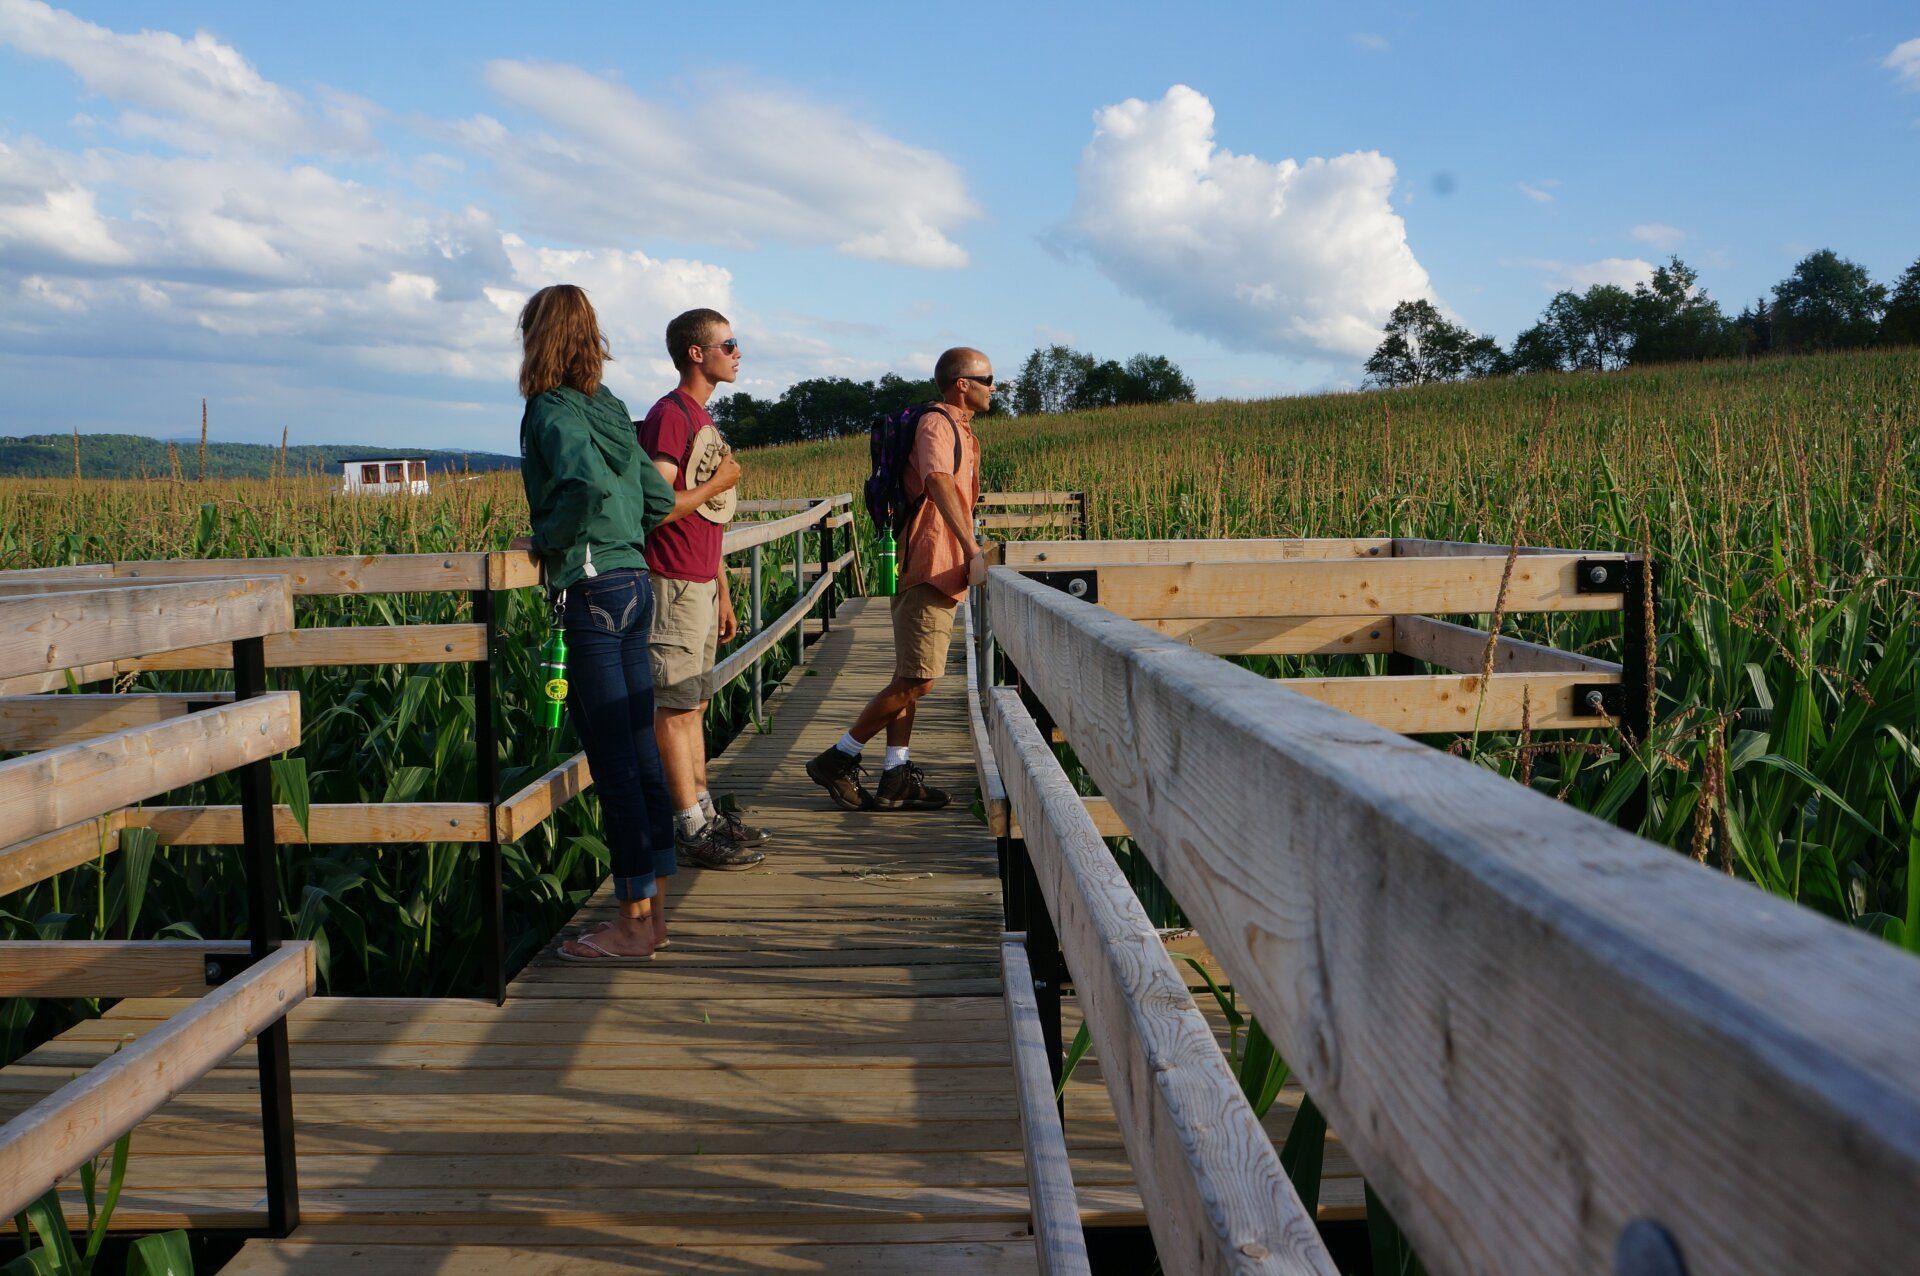 Atop one of the bridges inthe Great Vermont Corn Maze in North Danville, vT